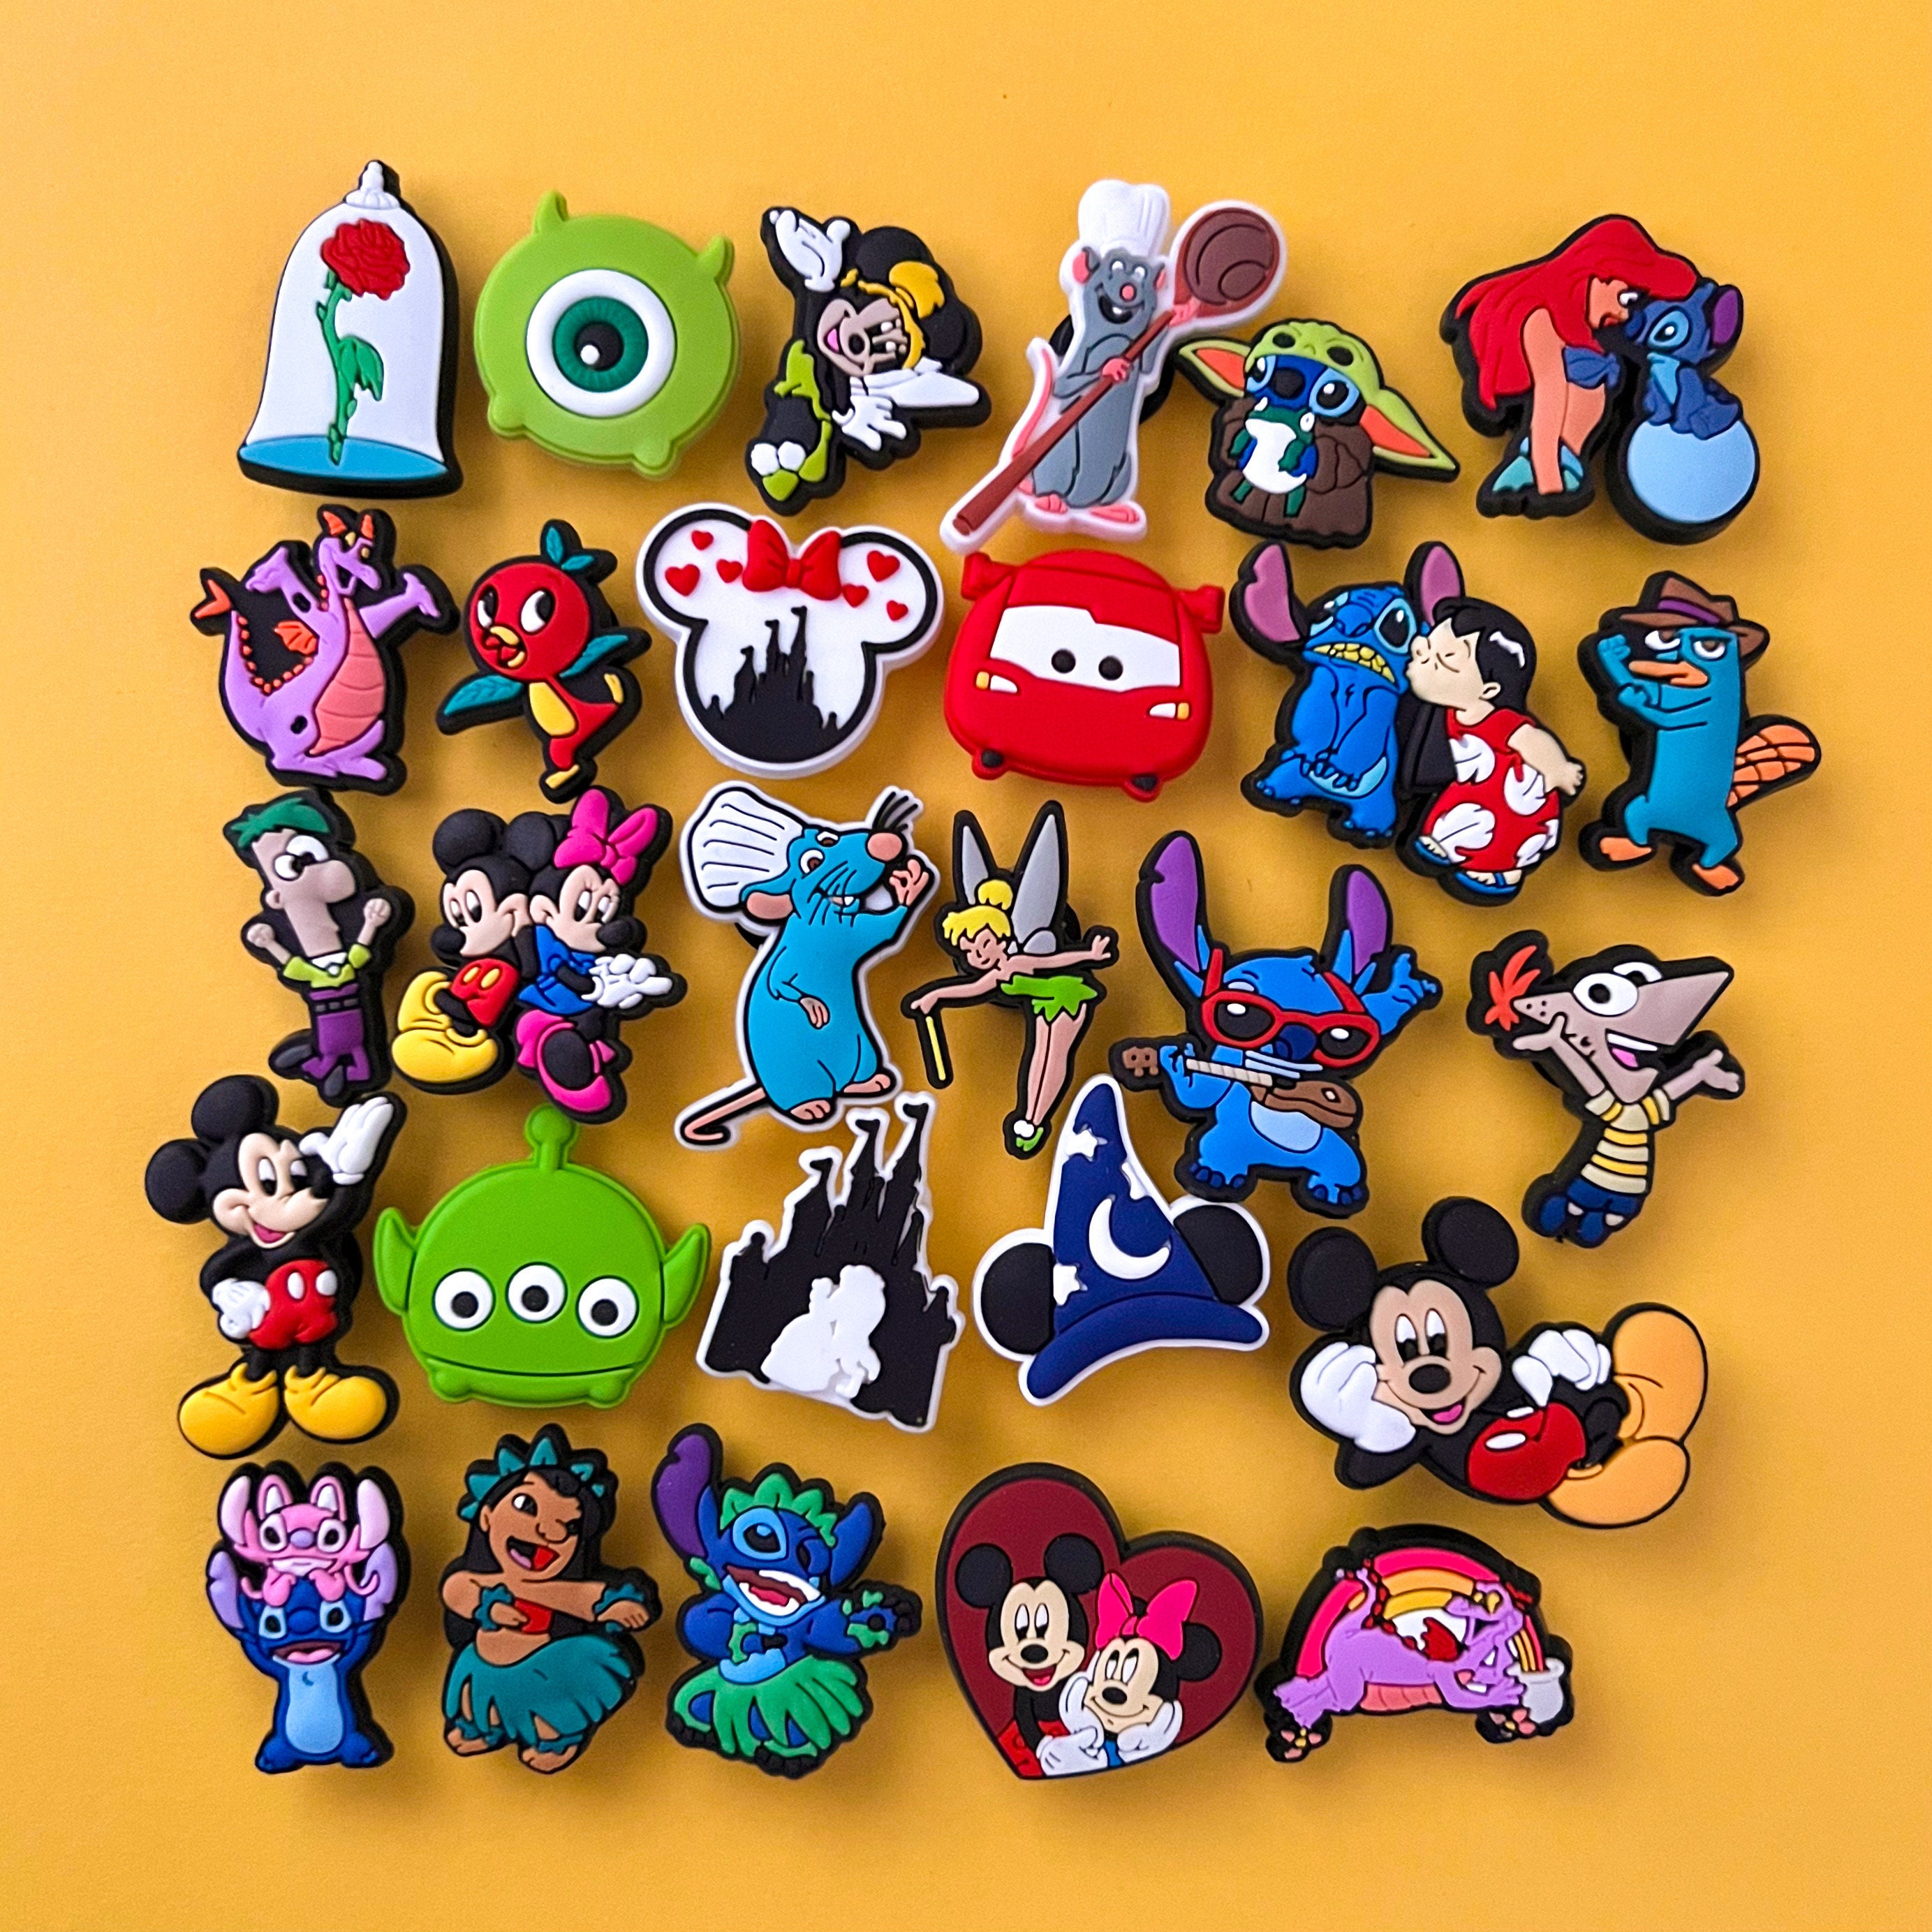 Disney Croc Charms Accessories Minnie Mouse Mickey Mouse Childrens  Accessories Toddler Crocs Goofy Donald Duck 